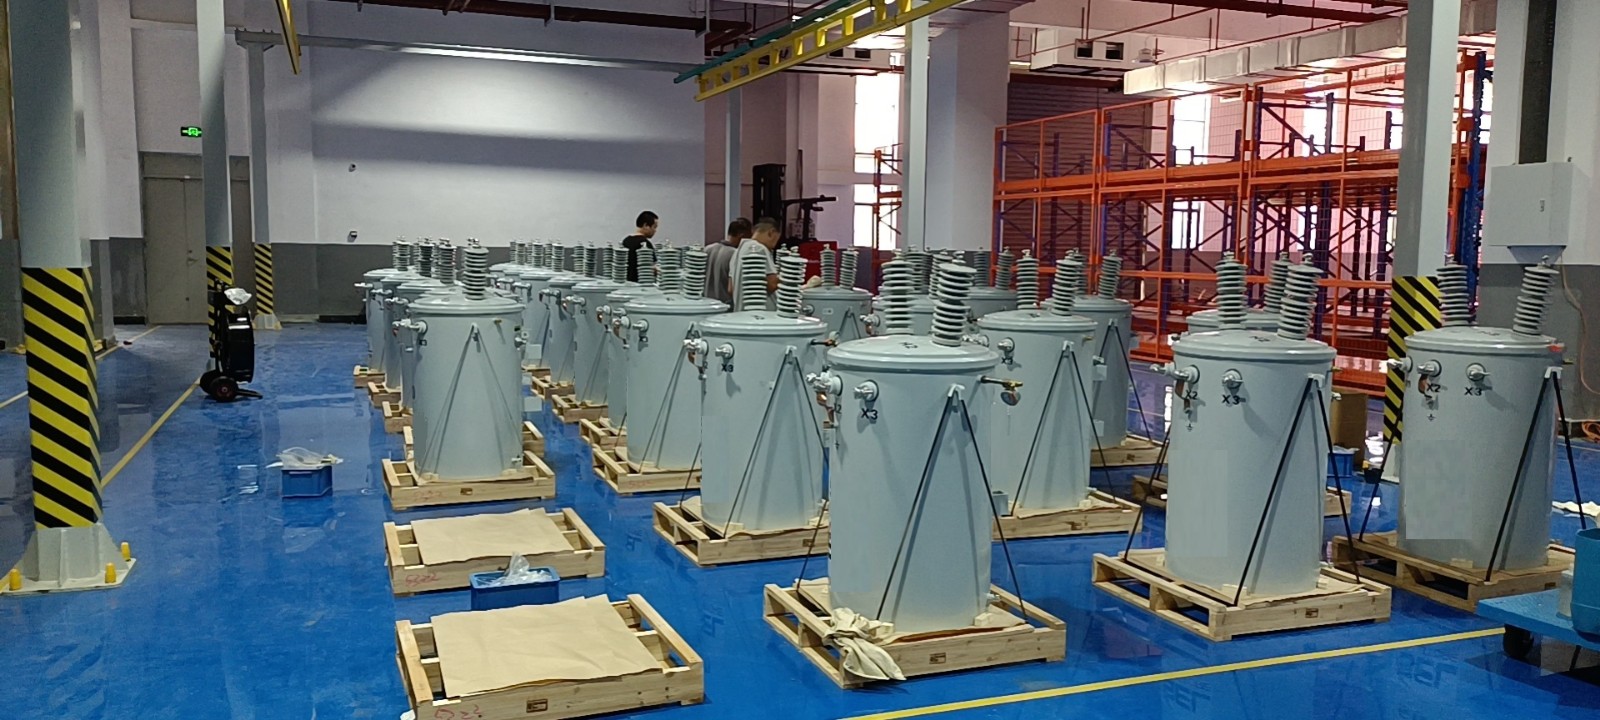 The Intelligent Manufacturing Project Of Eaglerise Post Type Distribution Transformer Was Put Into Operation Smoothly